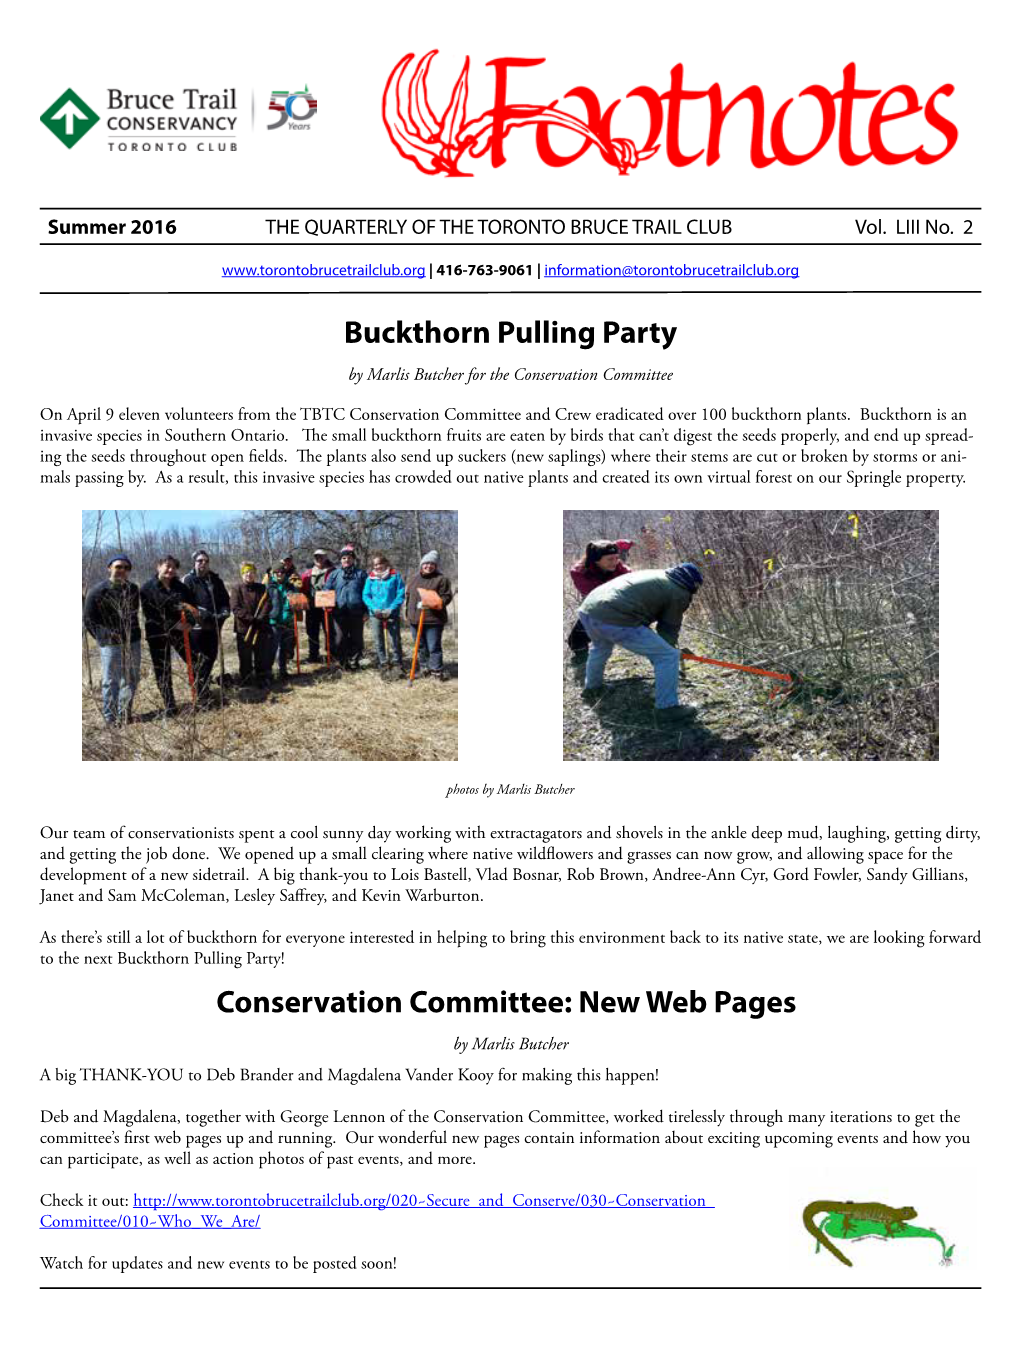 Buckthorn Pulling Party Conservation Committee: New Web